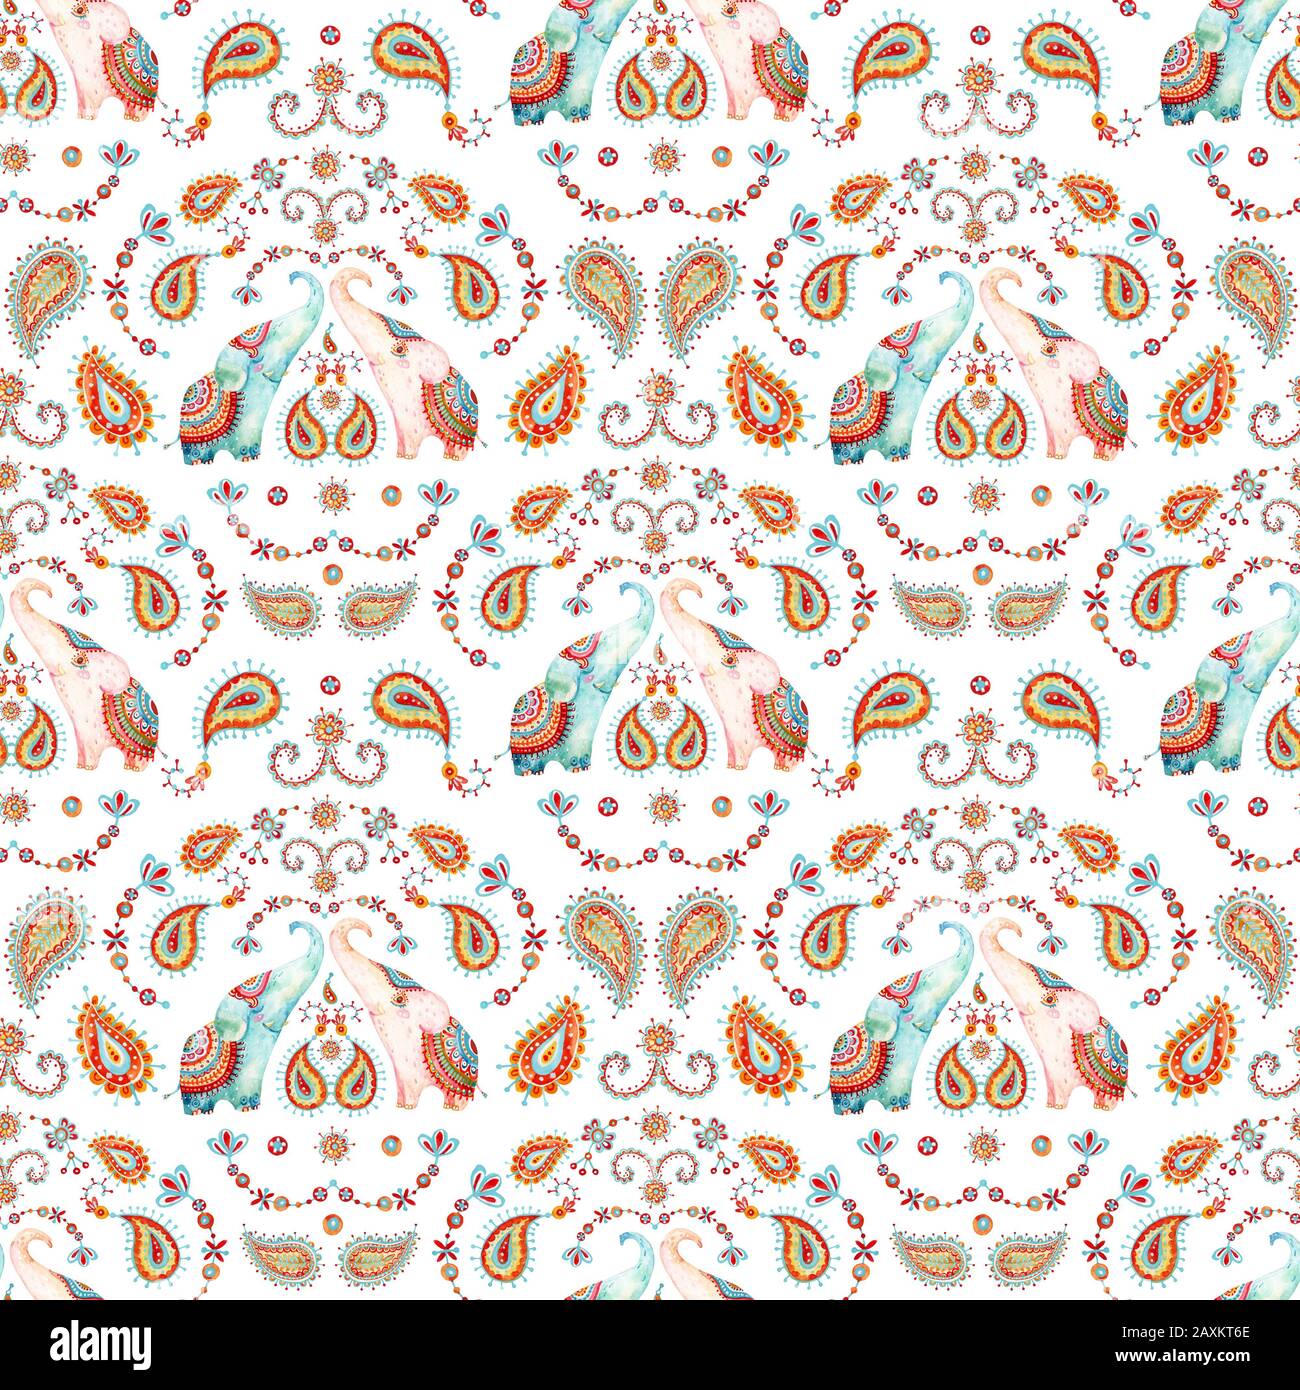 Tribal Watercolor Seamless Pattern Elephant Paisley Ornament Ethnic Indian Elephants Background Hand Drawn Illustration For Prints Wallpaper Clo Stock Photo Alamy